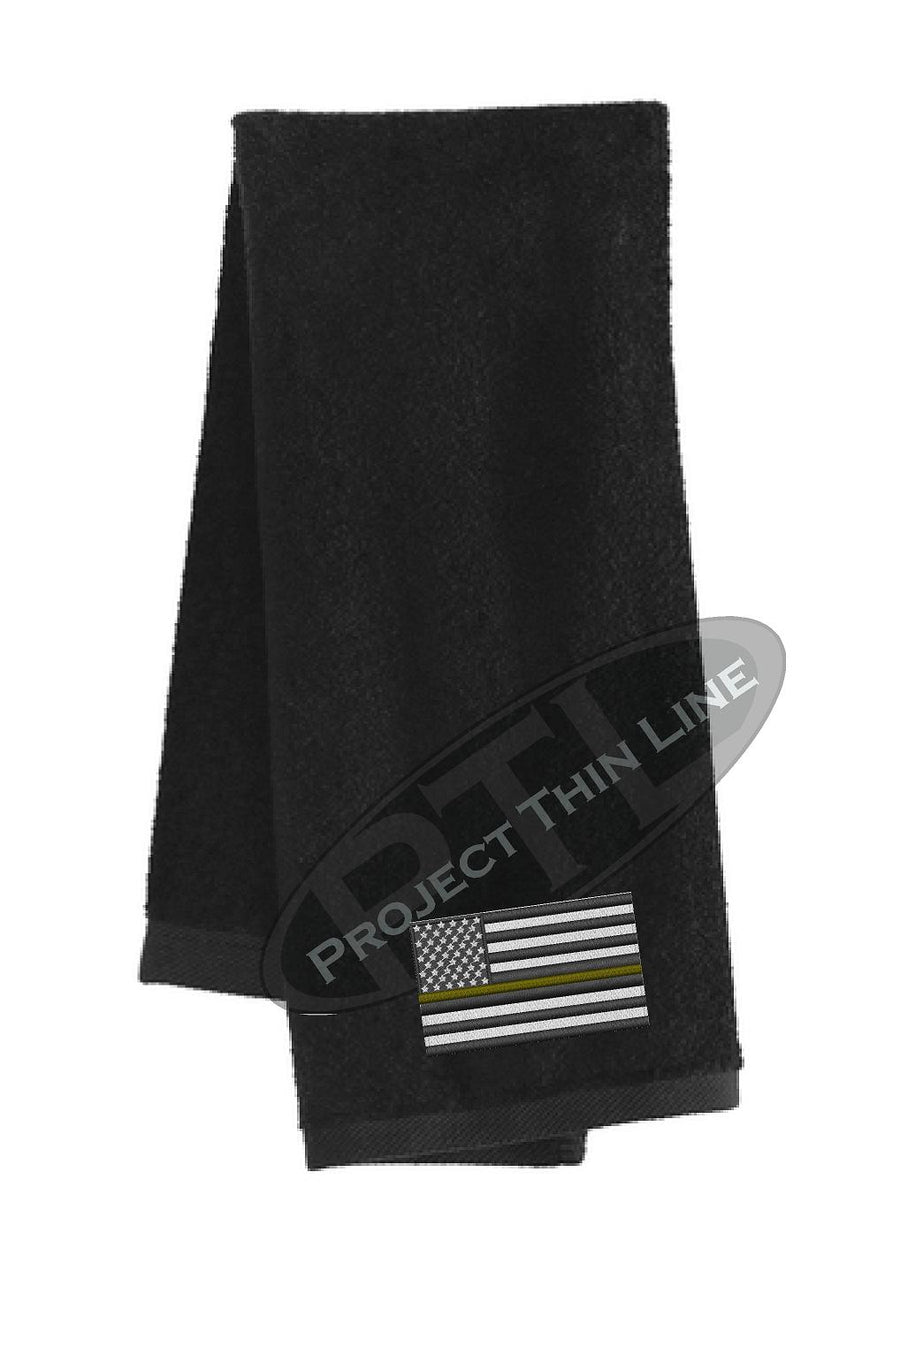 Thin GOLD Line Flag Workout Gym Towel